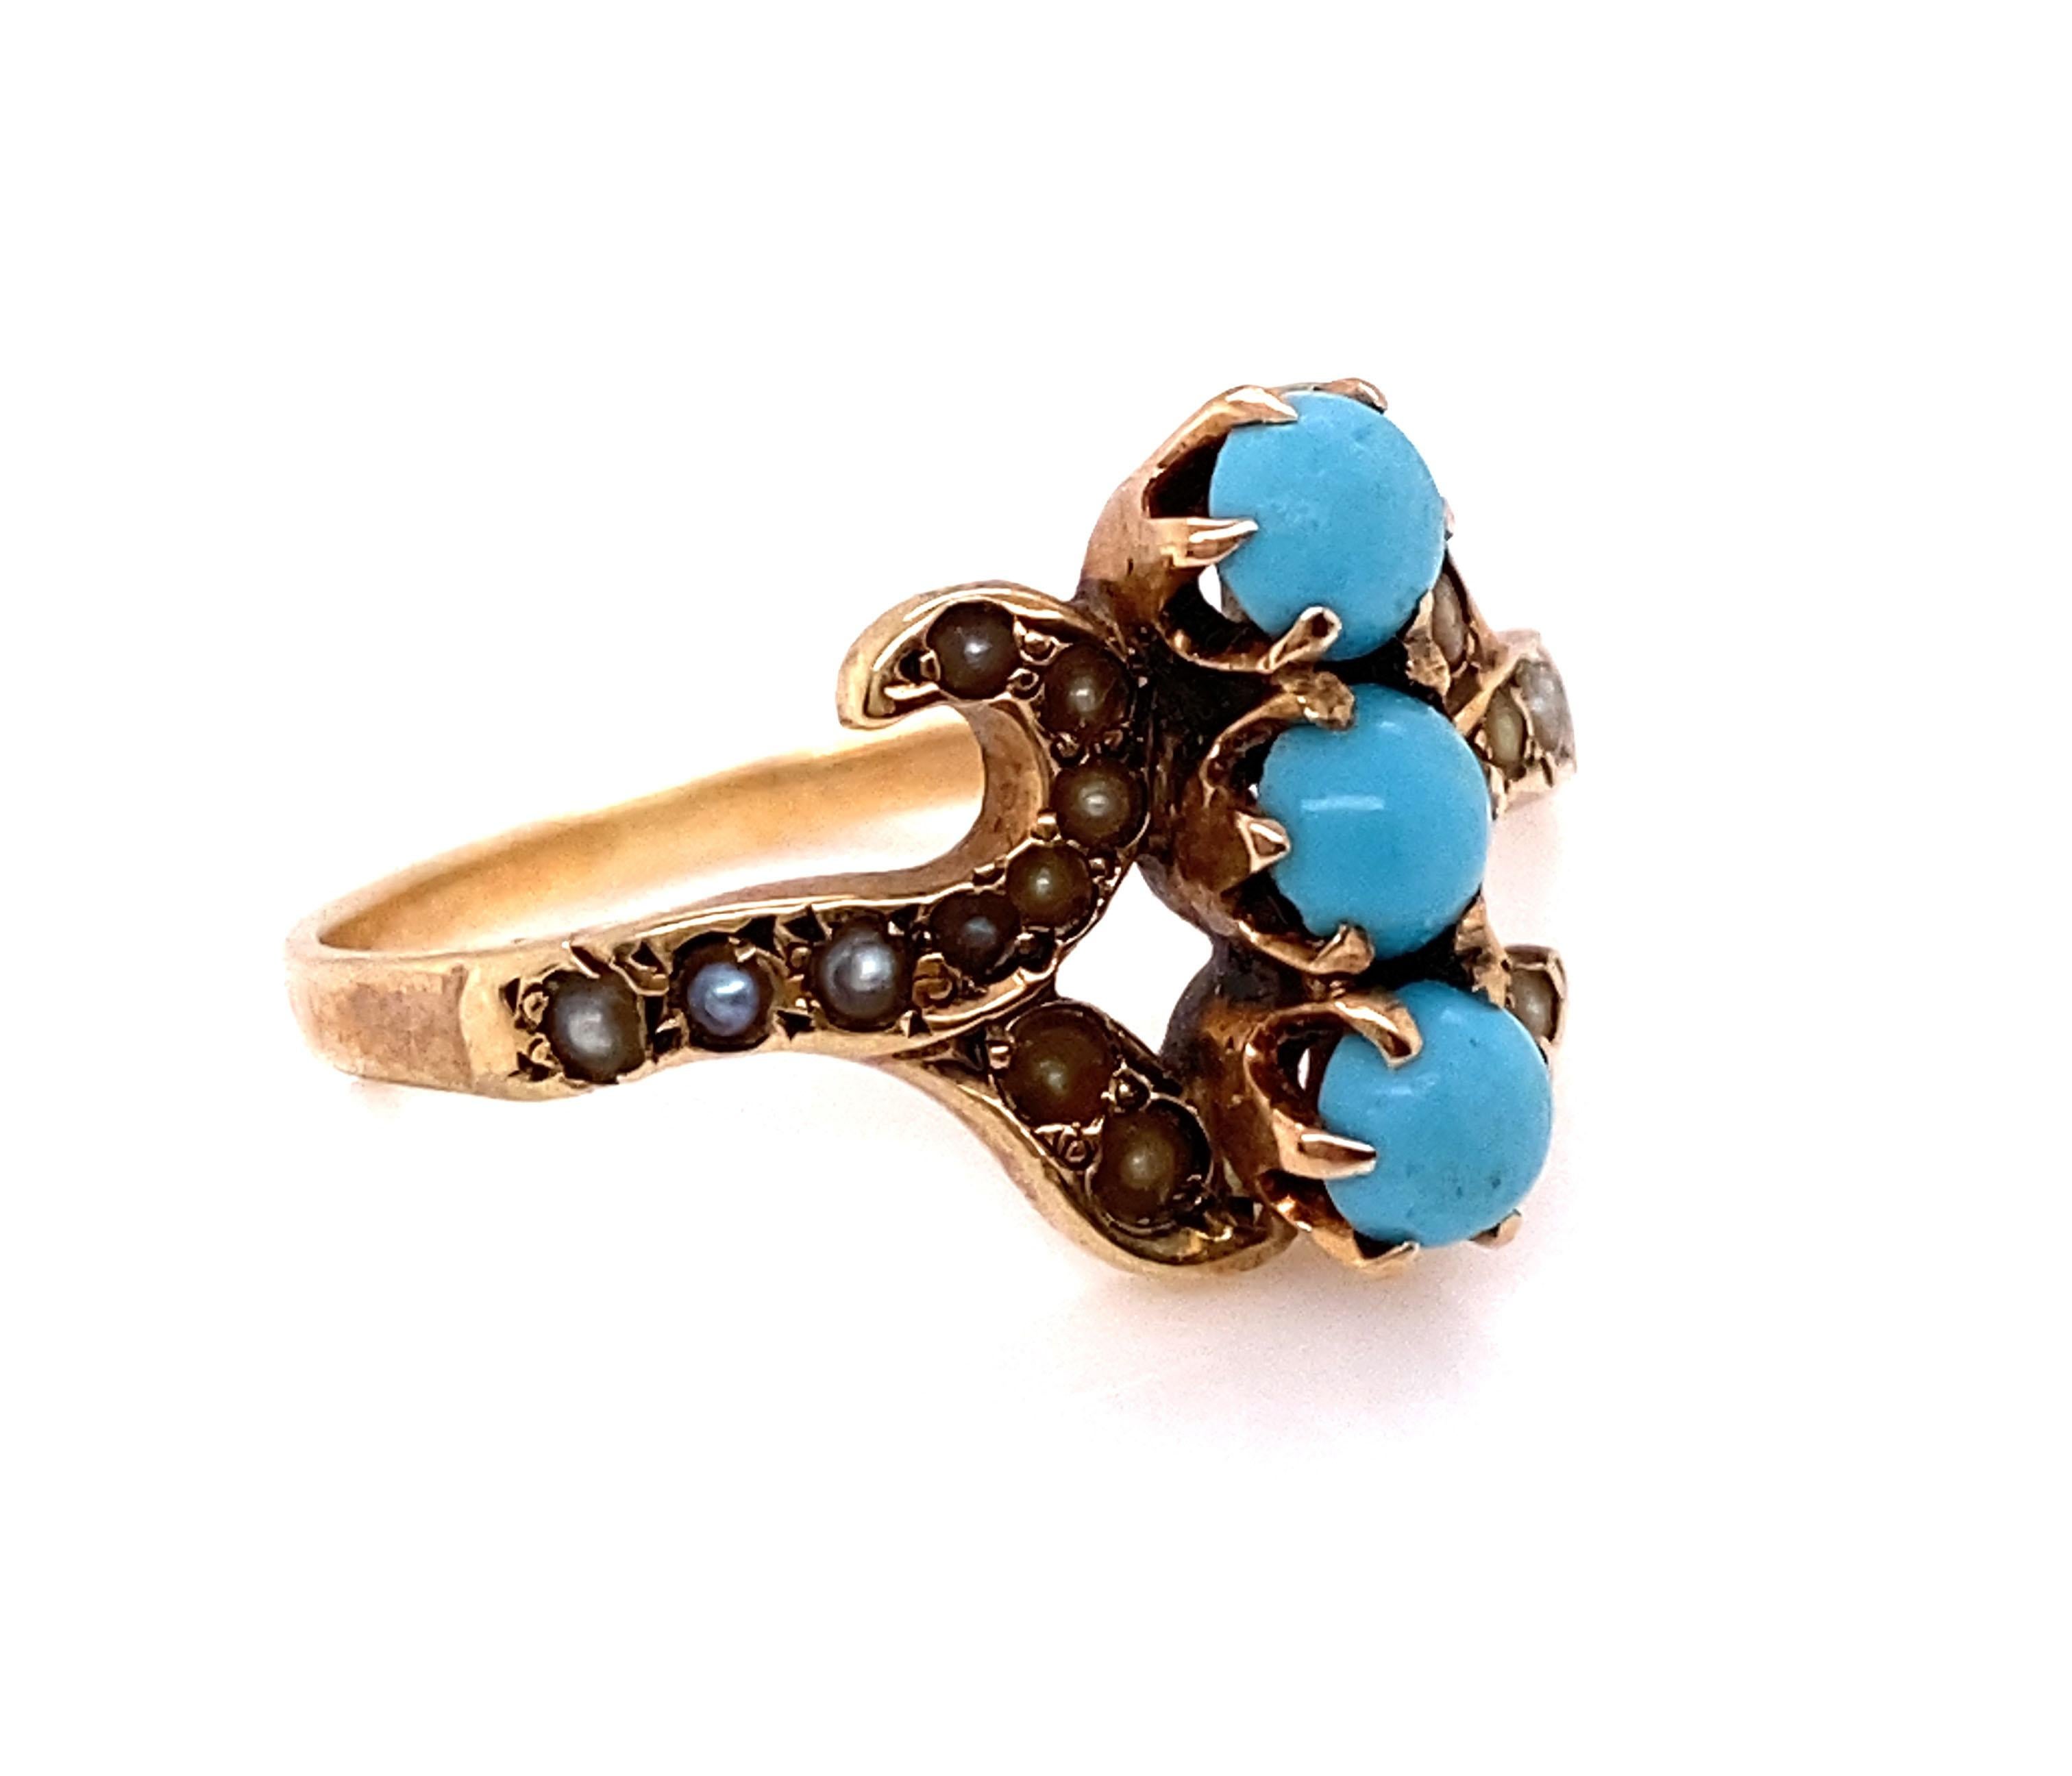 Round Cut Victorian Turquoise Ring Seed Pearls 3 Stone Original 1860's -1880's Antique 14K